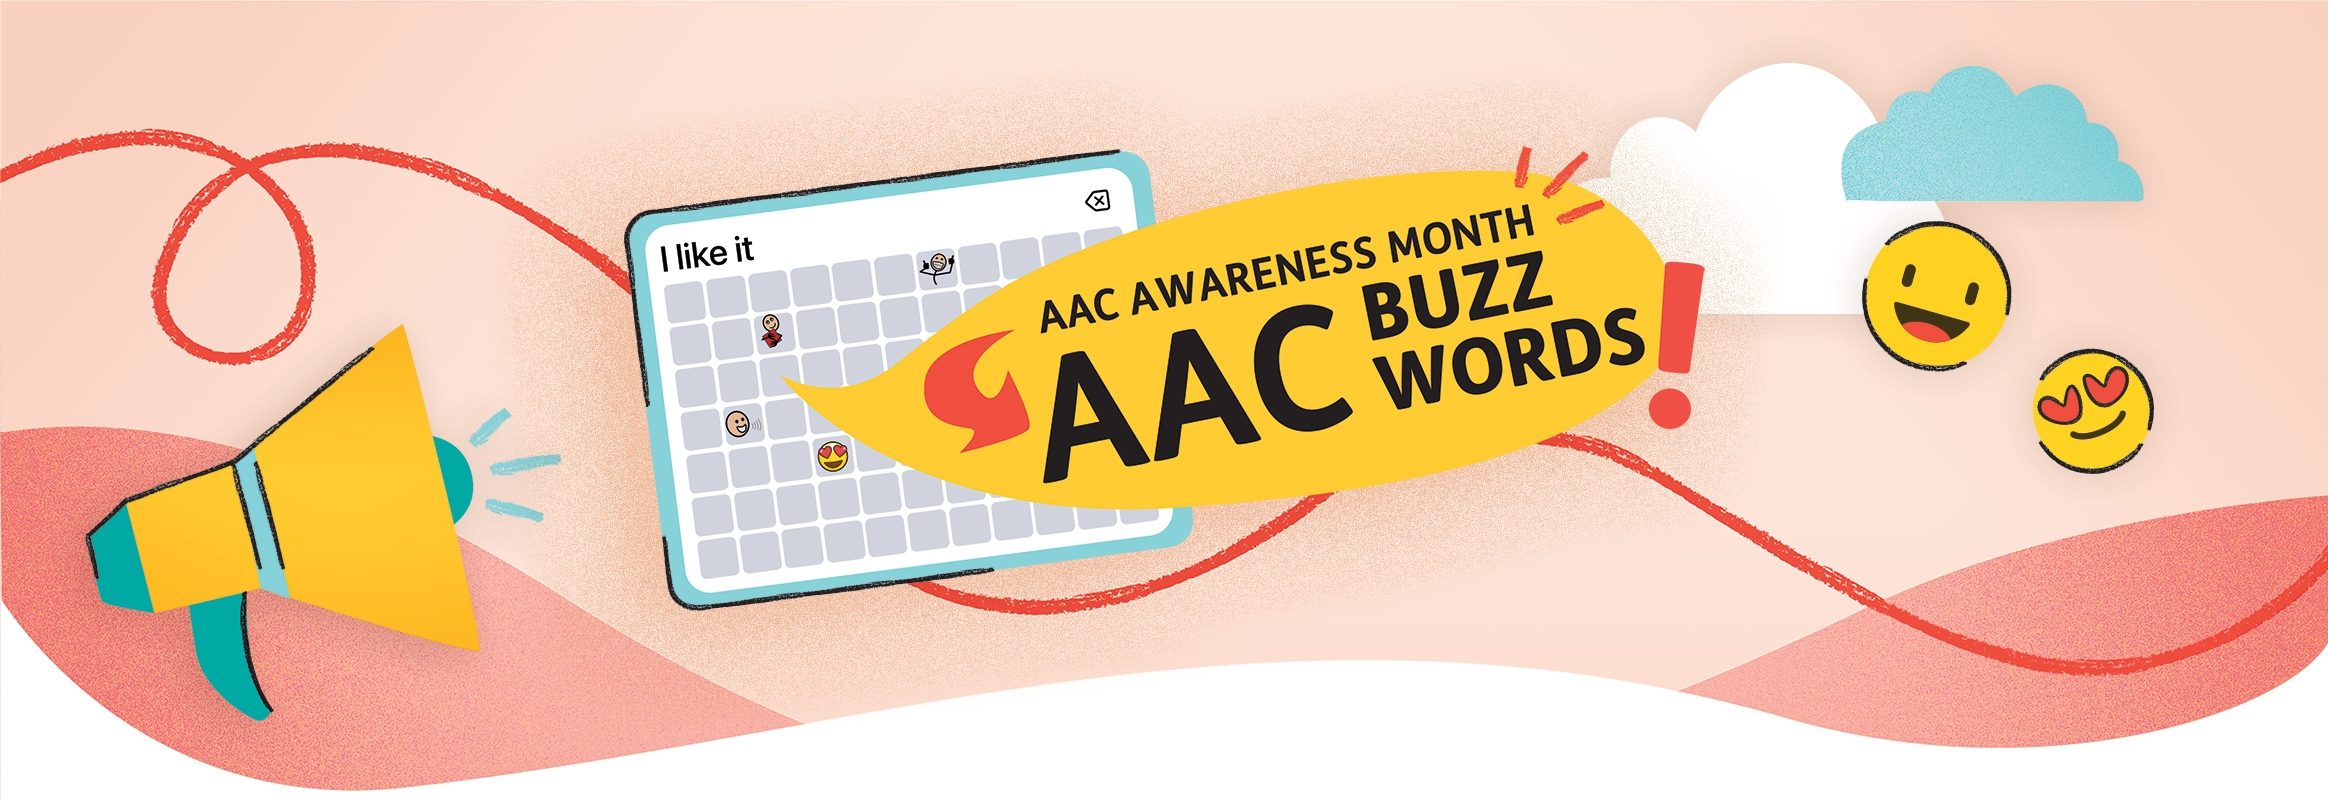 AAC Awareness Month buzzwords illustration